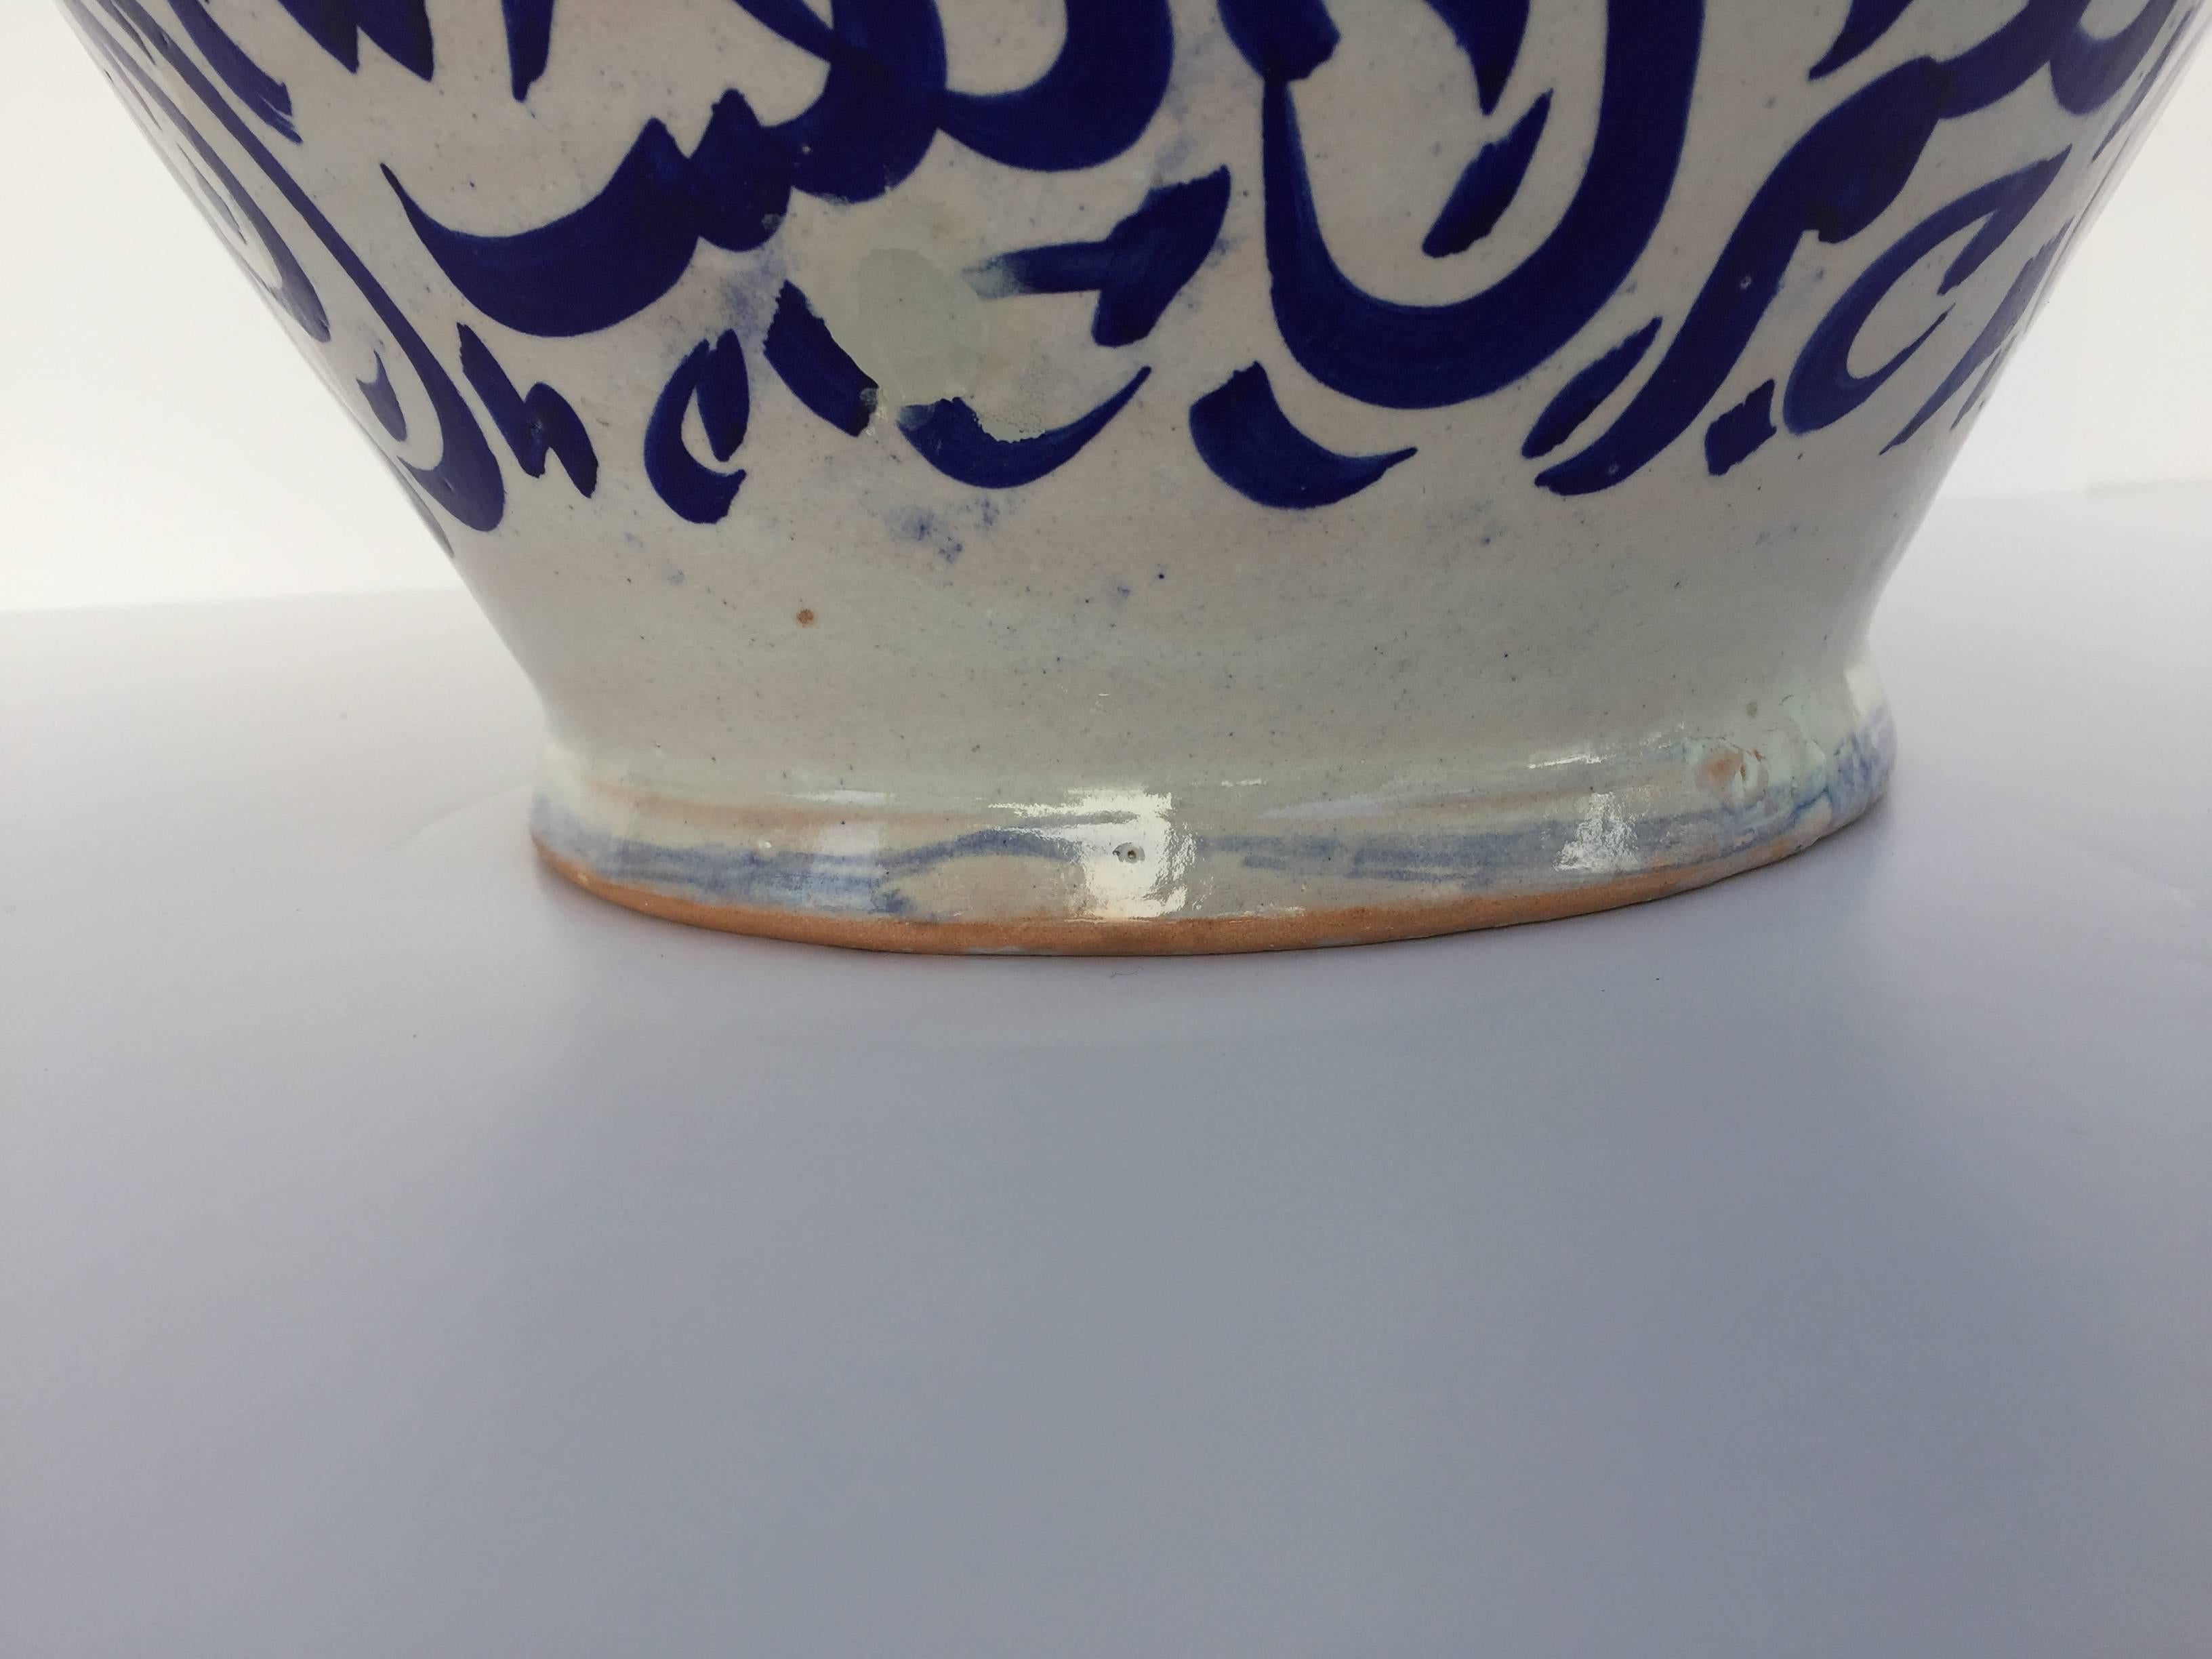 Large Moroccan Ceramic Vase from Fez with Blue Calligraphy Writing (20. Jahrhundert)